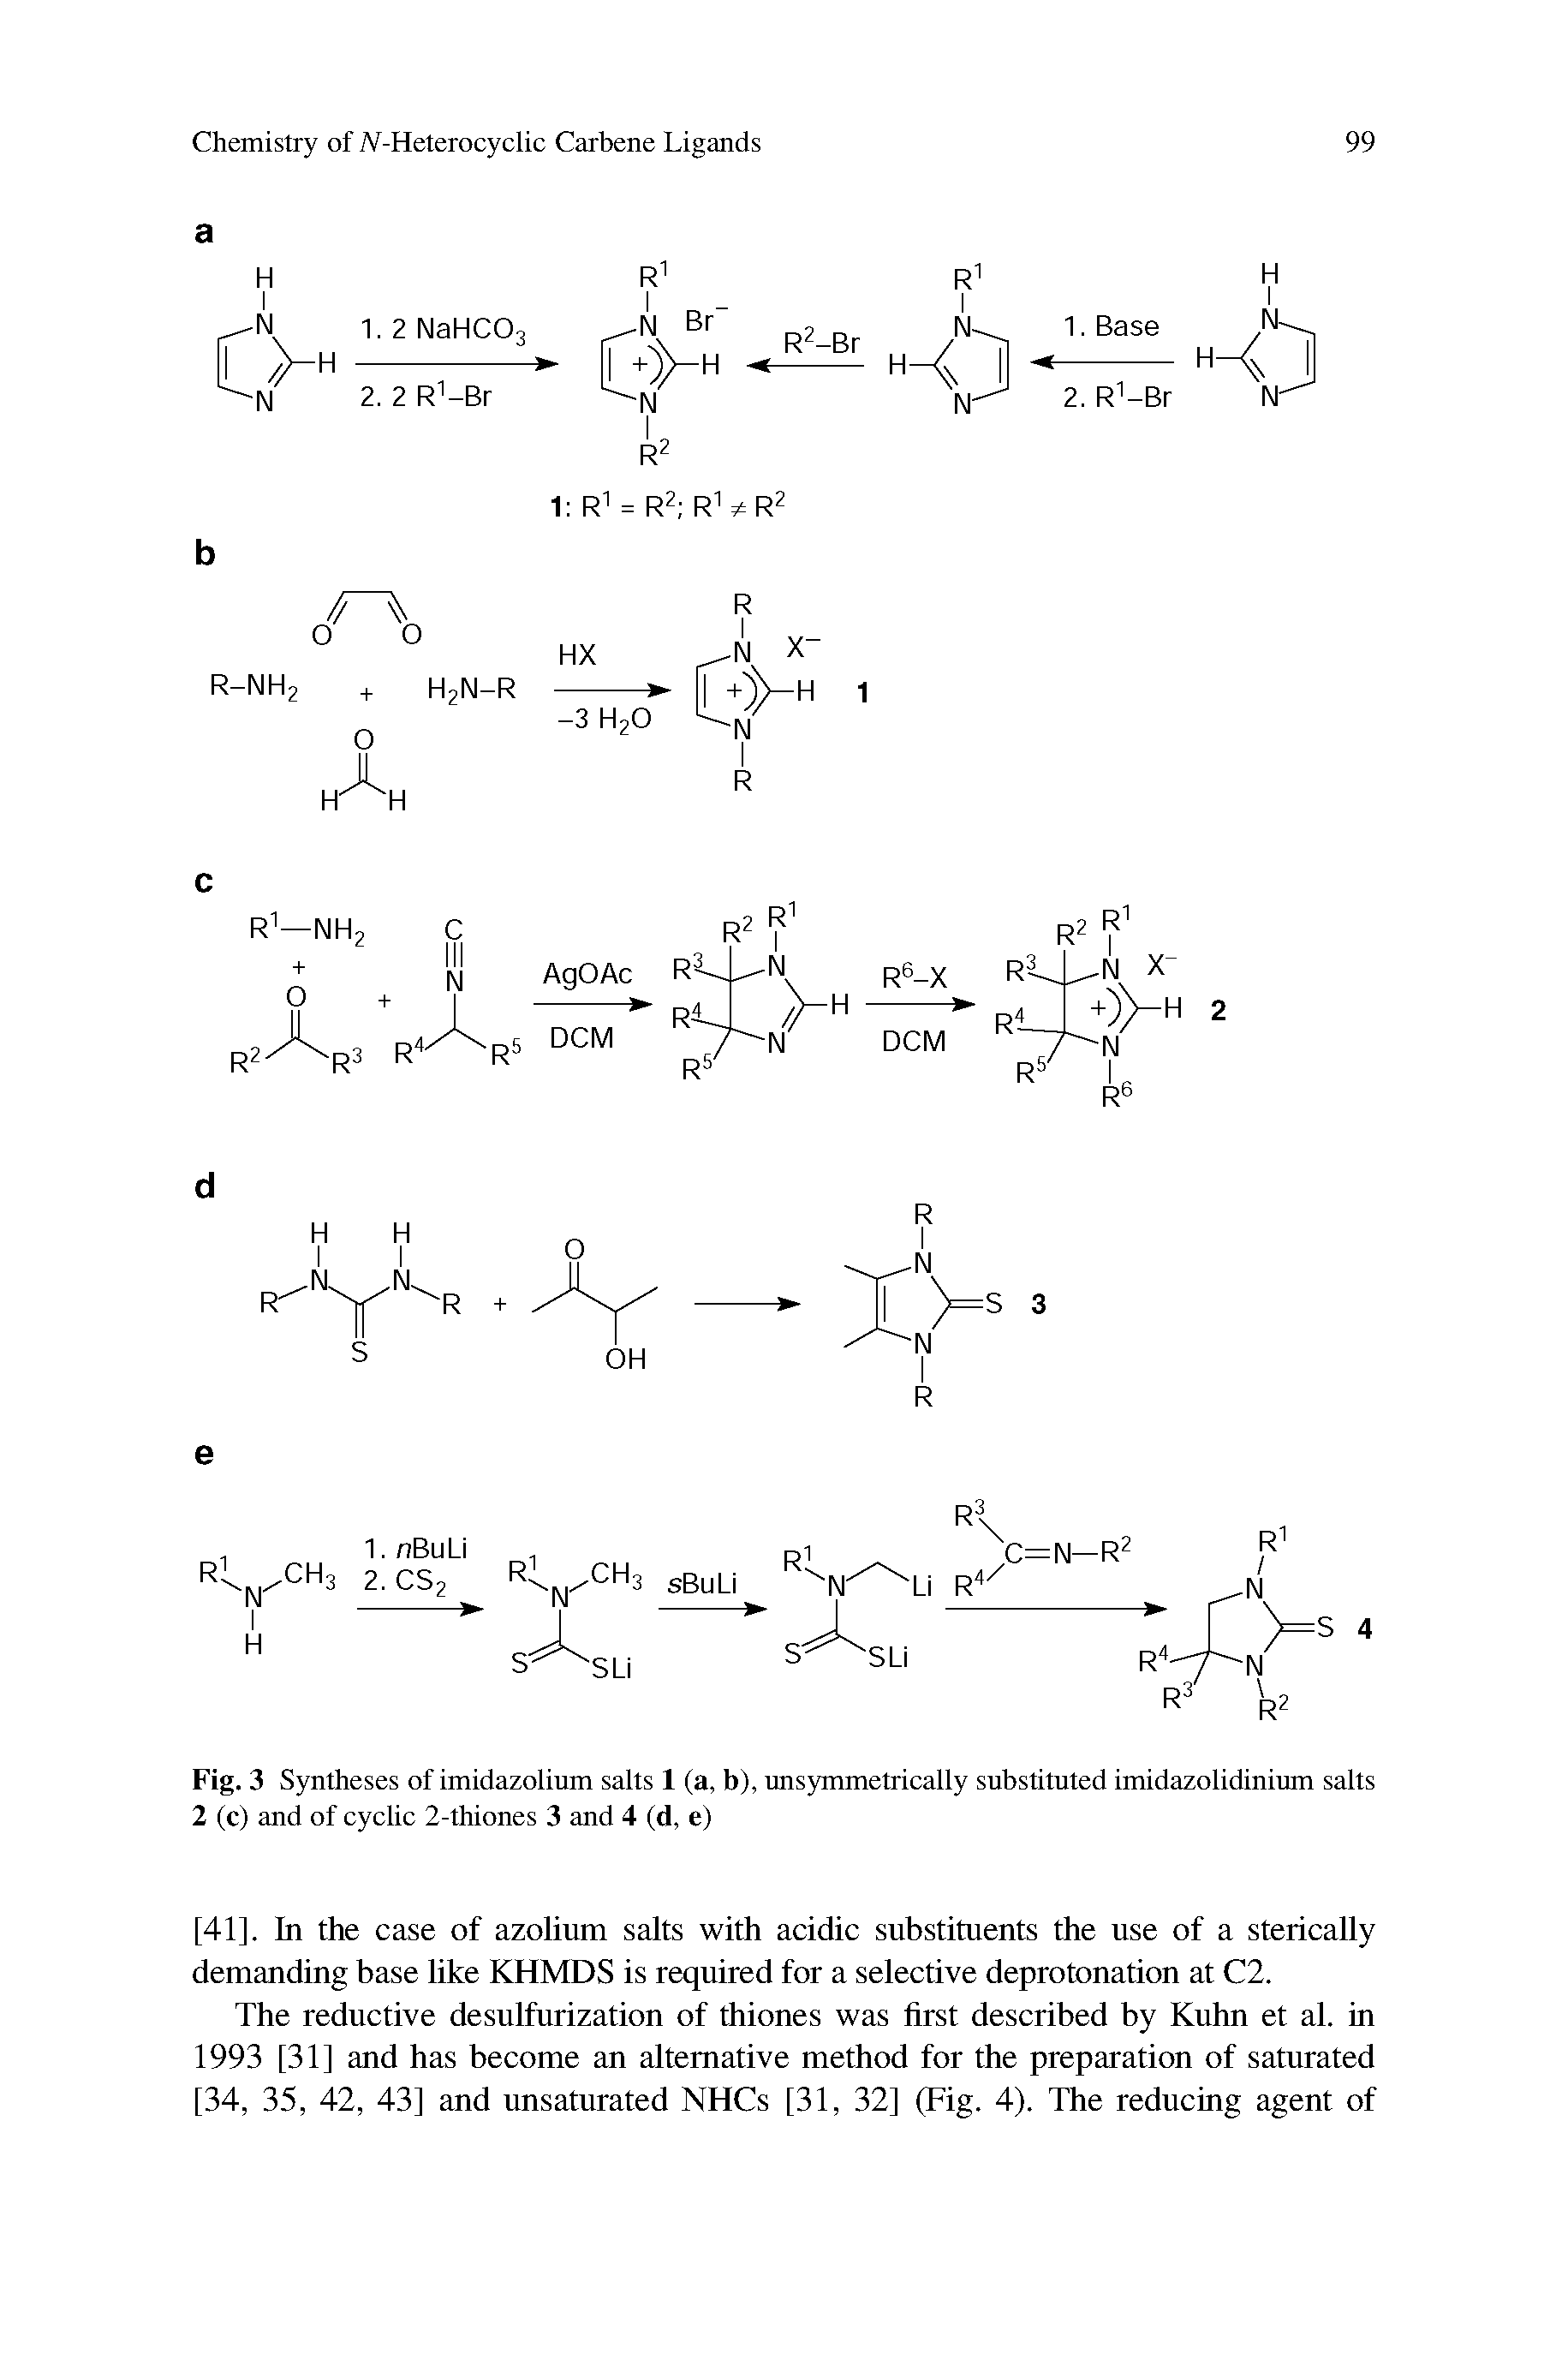 Fig. 3 Syntheses of imidazolium salts 1 (a, b), unsymmetrically substituted imidazolidinium salts 2 (c) and of cyclic 2-thiones 3 and 4 (d, e)...